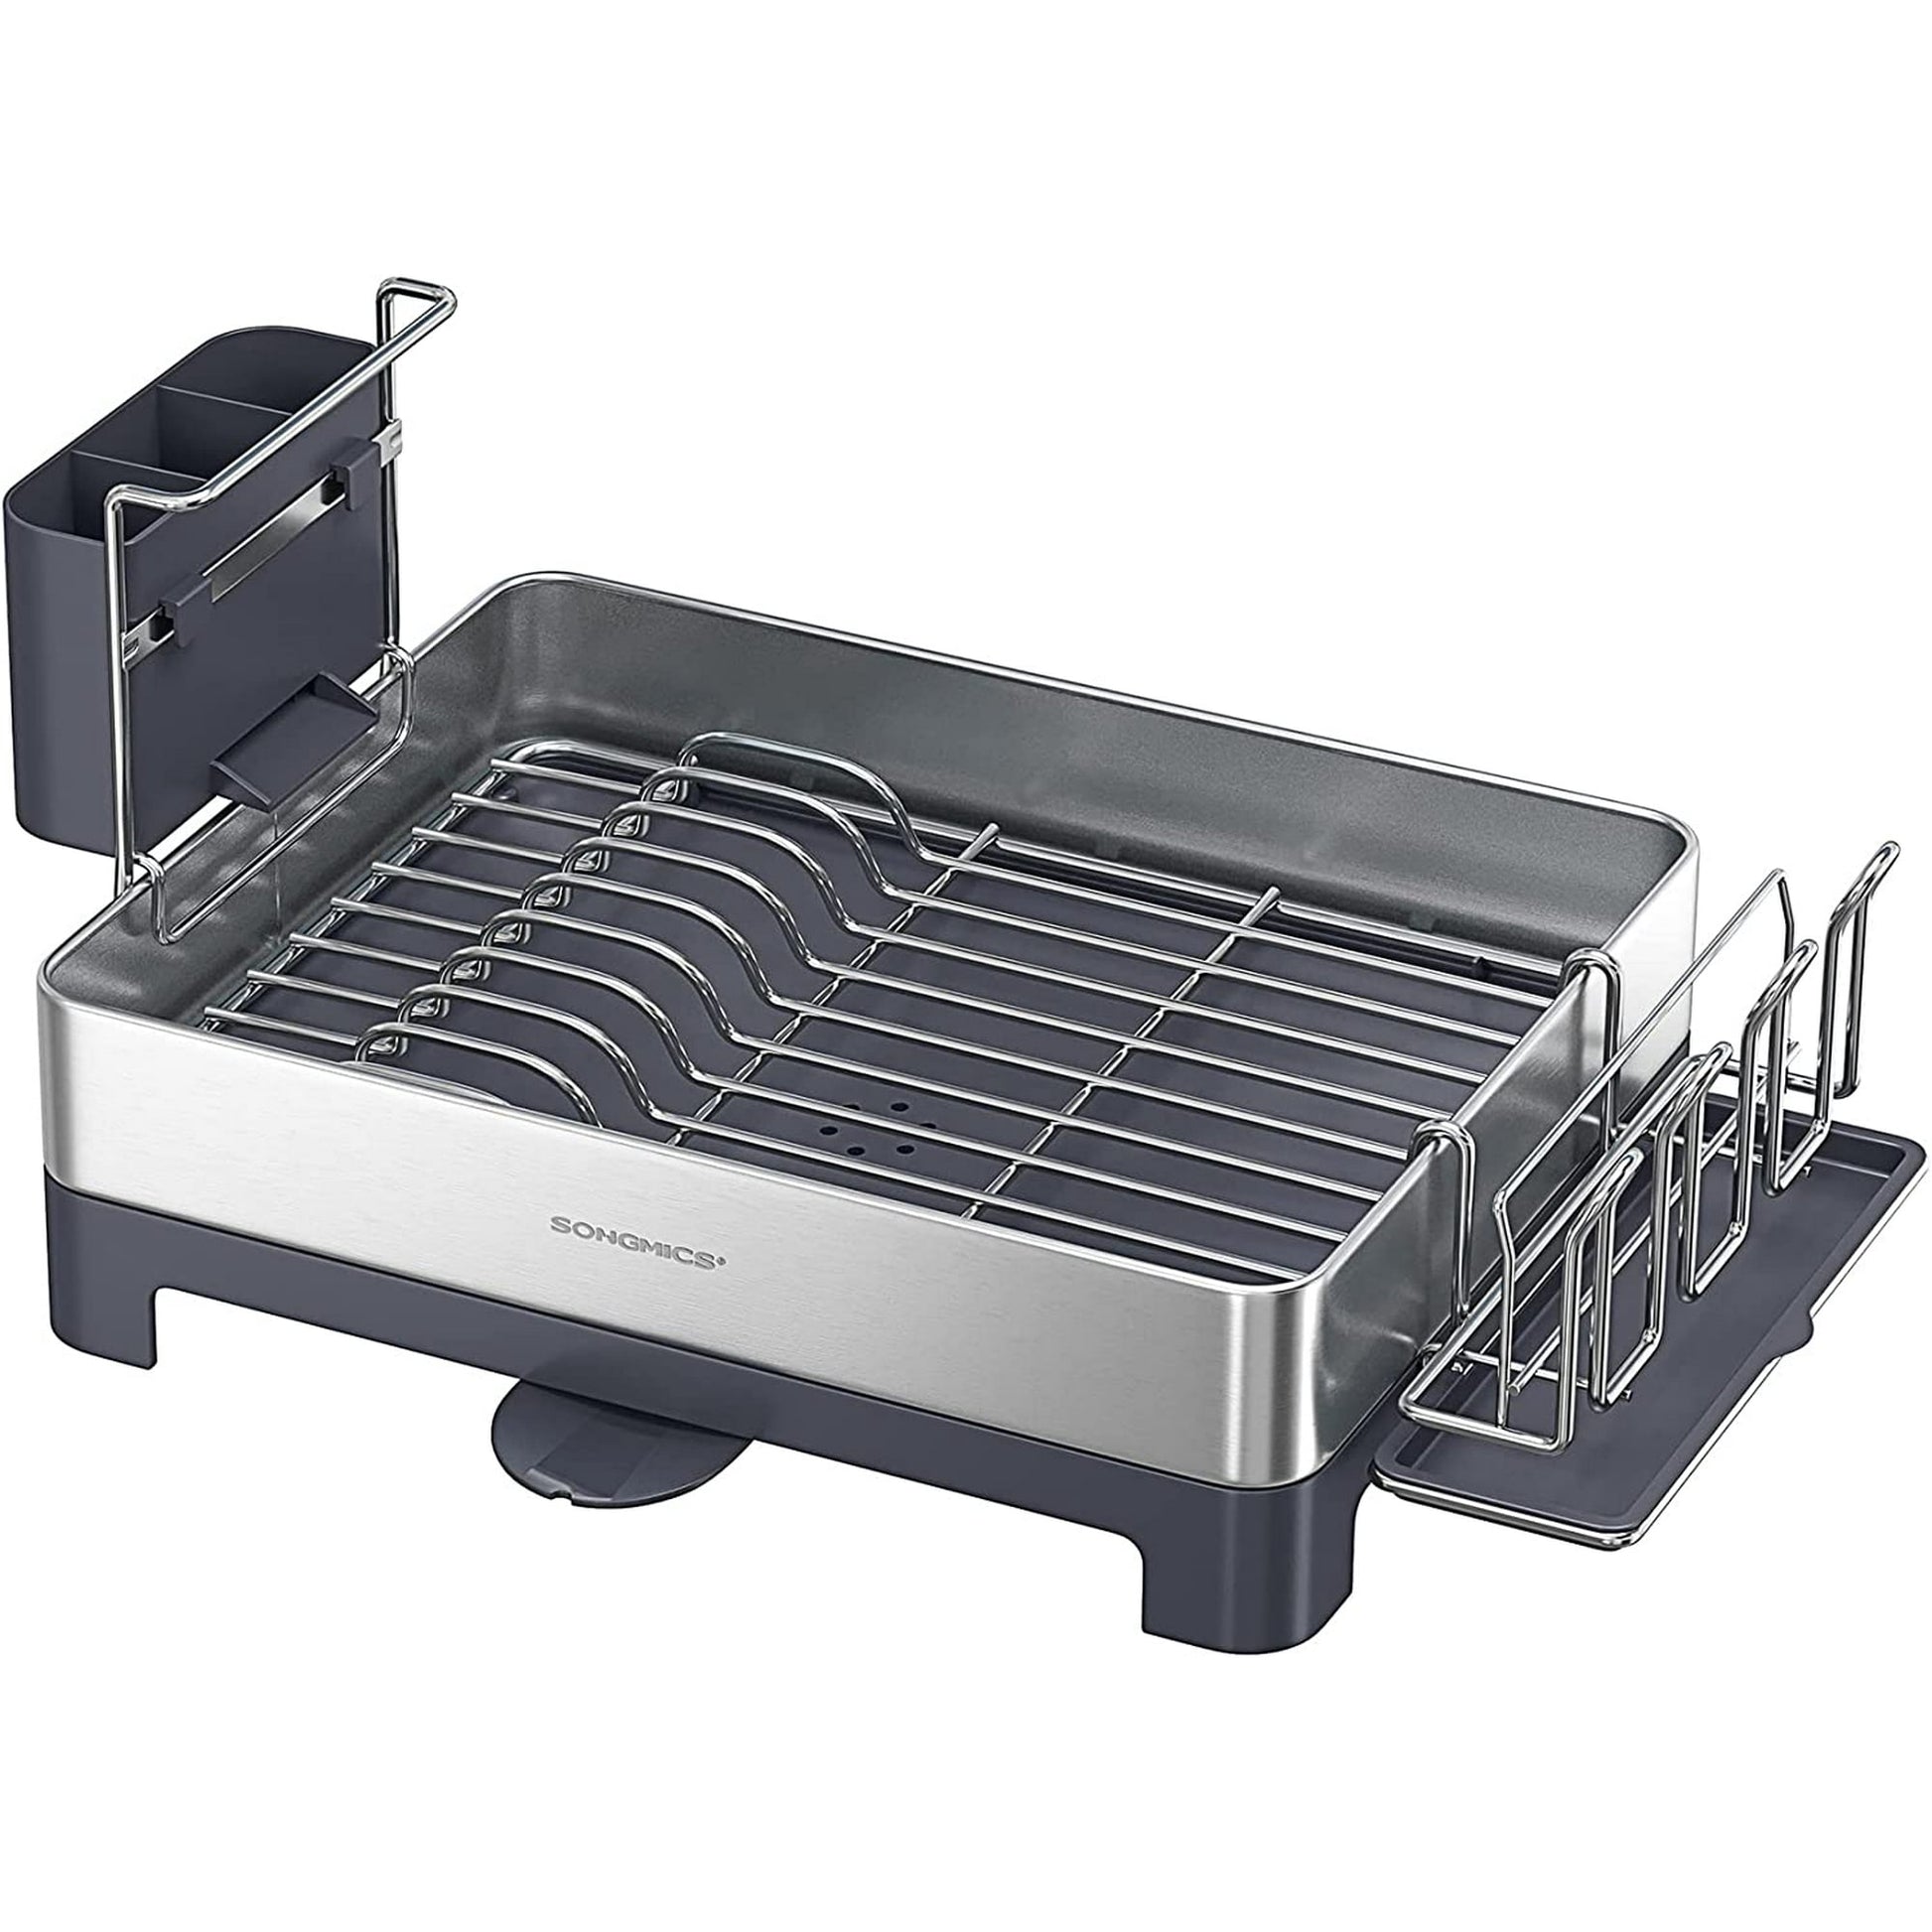 https://songmicschome.com/cdn/shop/files/SONGMICS-Dish-Drying-Rack-Stainless-Steel-Full-Sized-Racks-Kitchen-Counter-Drainers-360-Rotatable-Spout-Removable-Drainboard-Fingerprint-Proof-Silver_5a5accc7-39b4-4faa-8620-feedac0c6.jpg?v=1694152602&width=1946